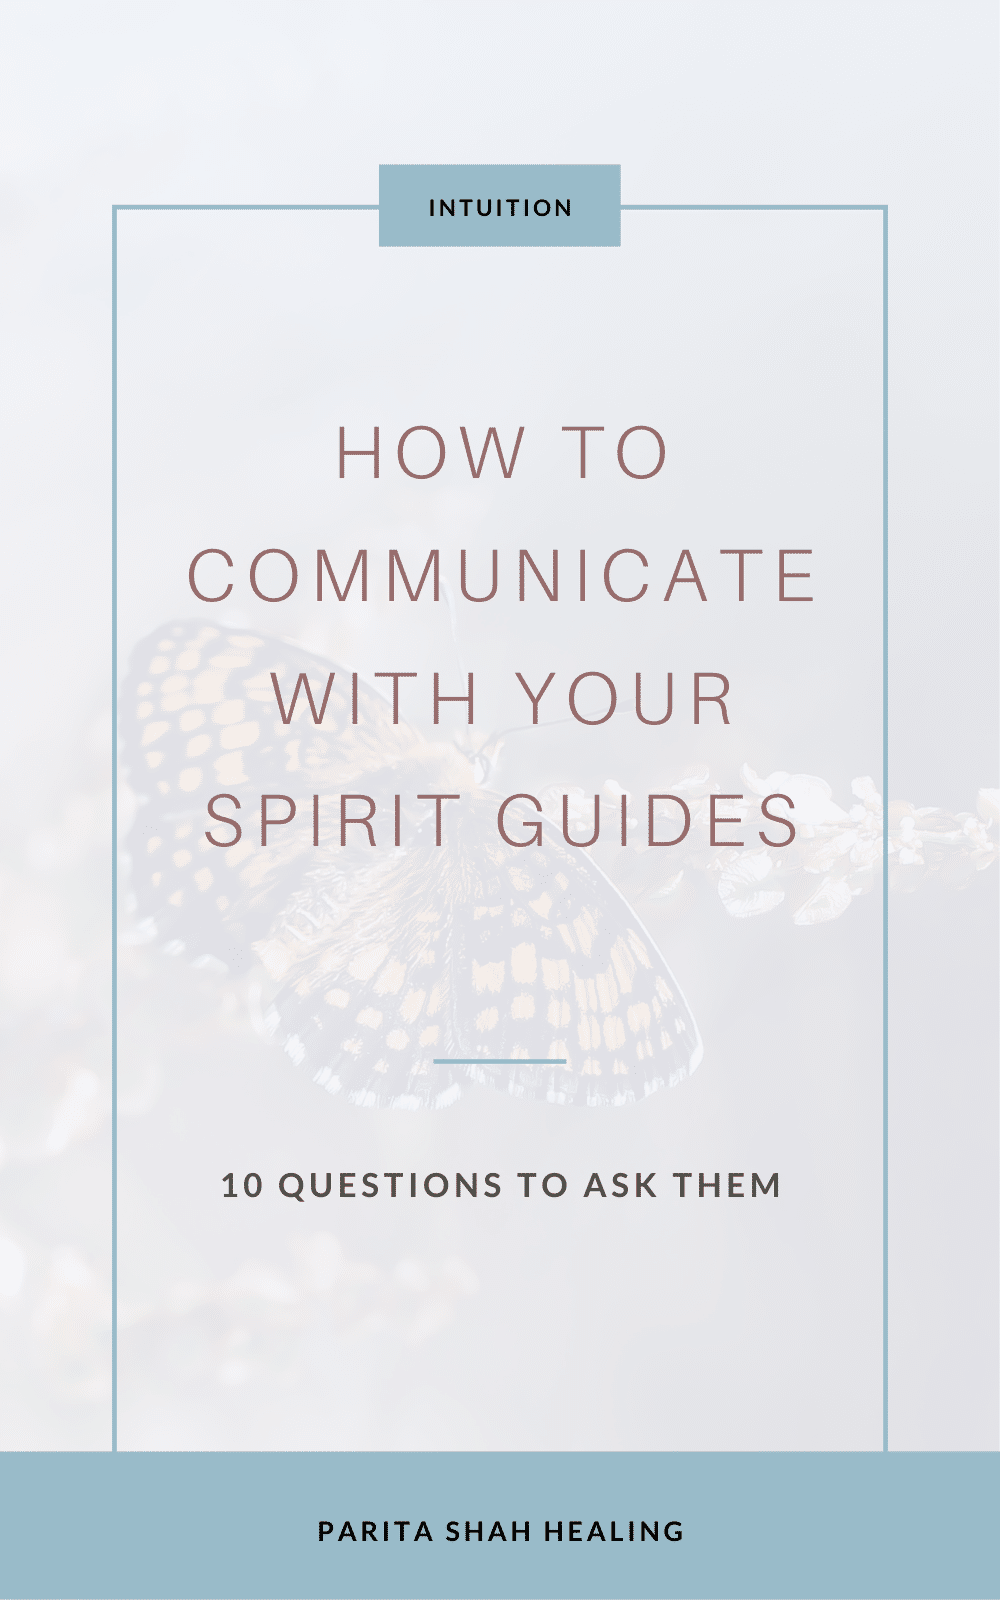 Speaking to Spirit Guides, Ascended Masters, Angels, and Power Animals